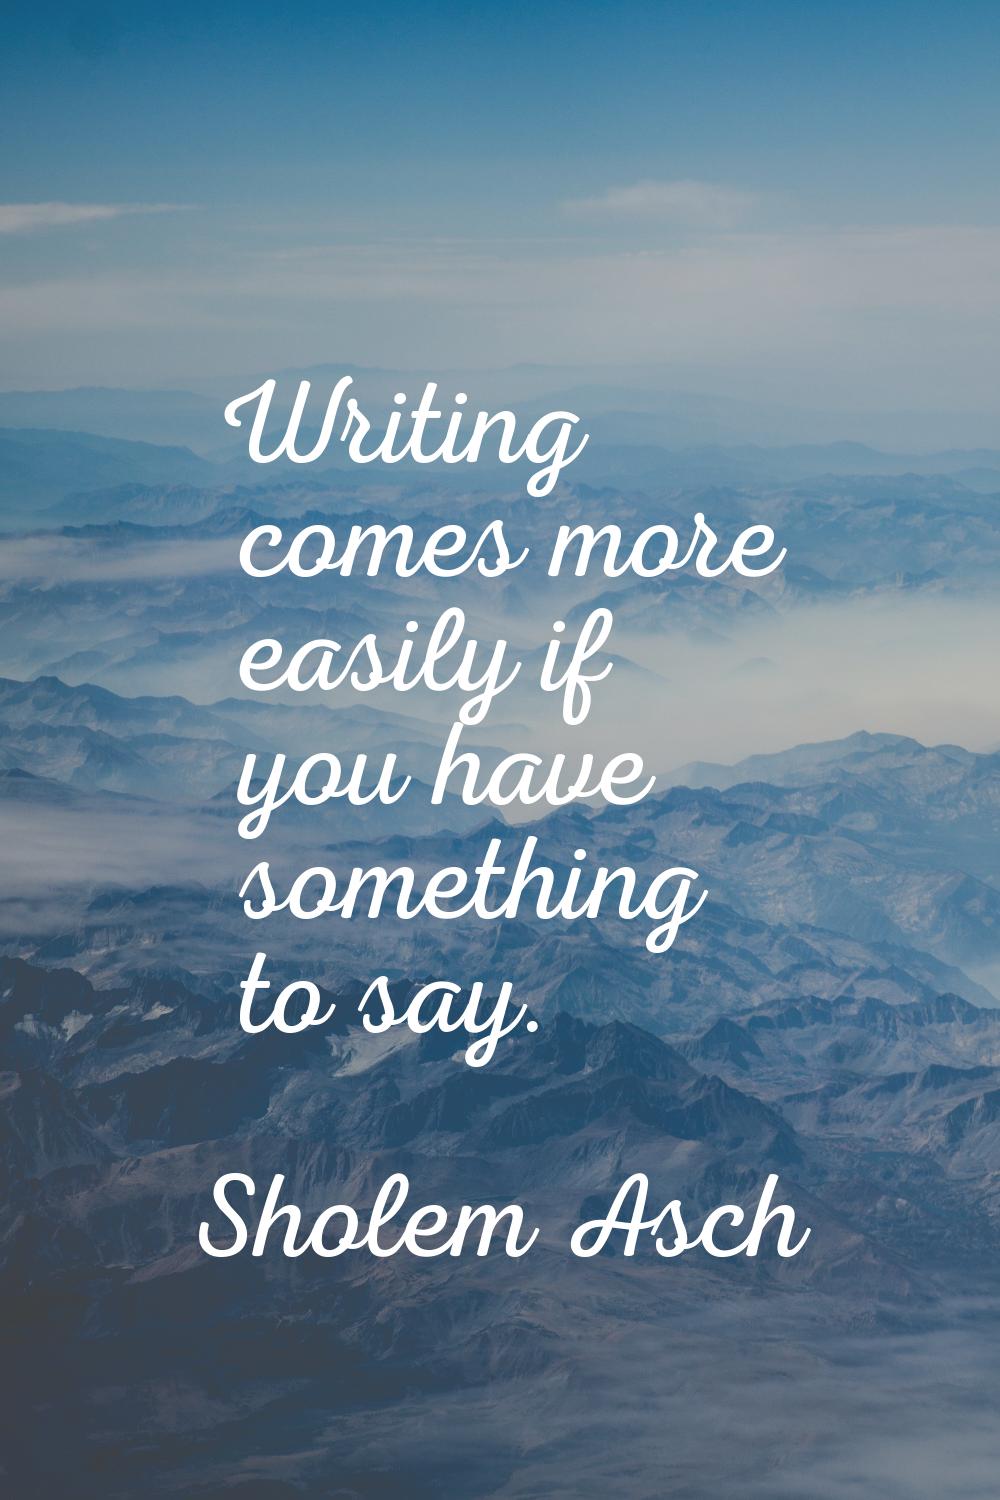 Writing comes more easily if you have something to say.